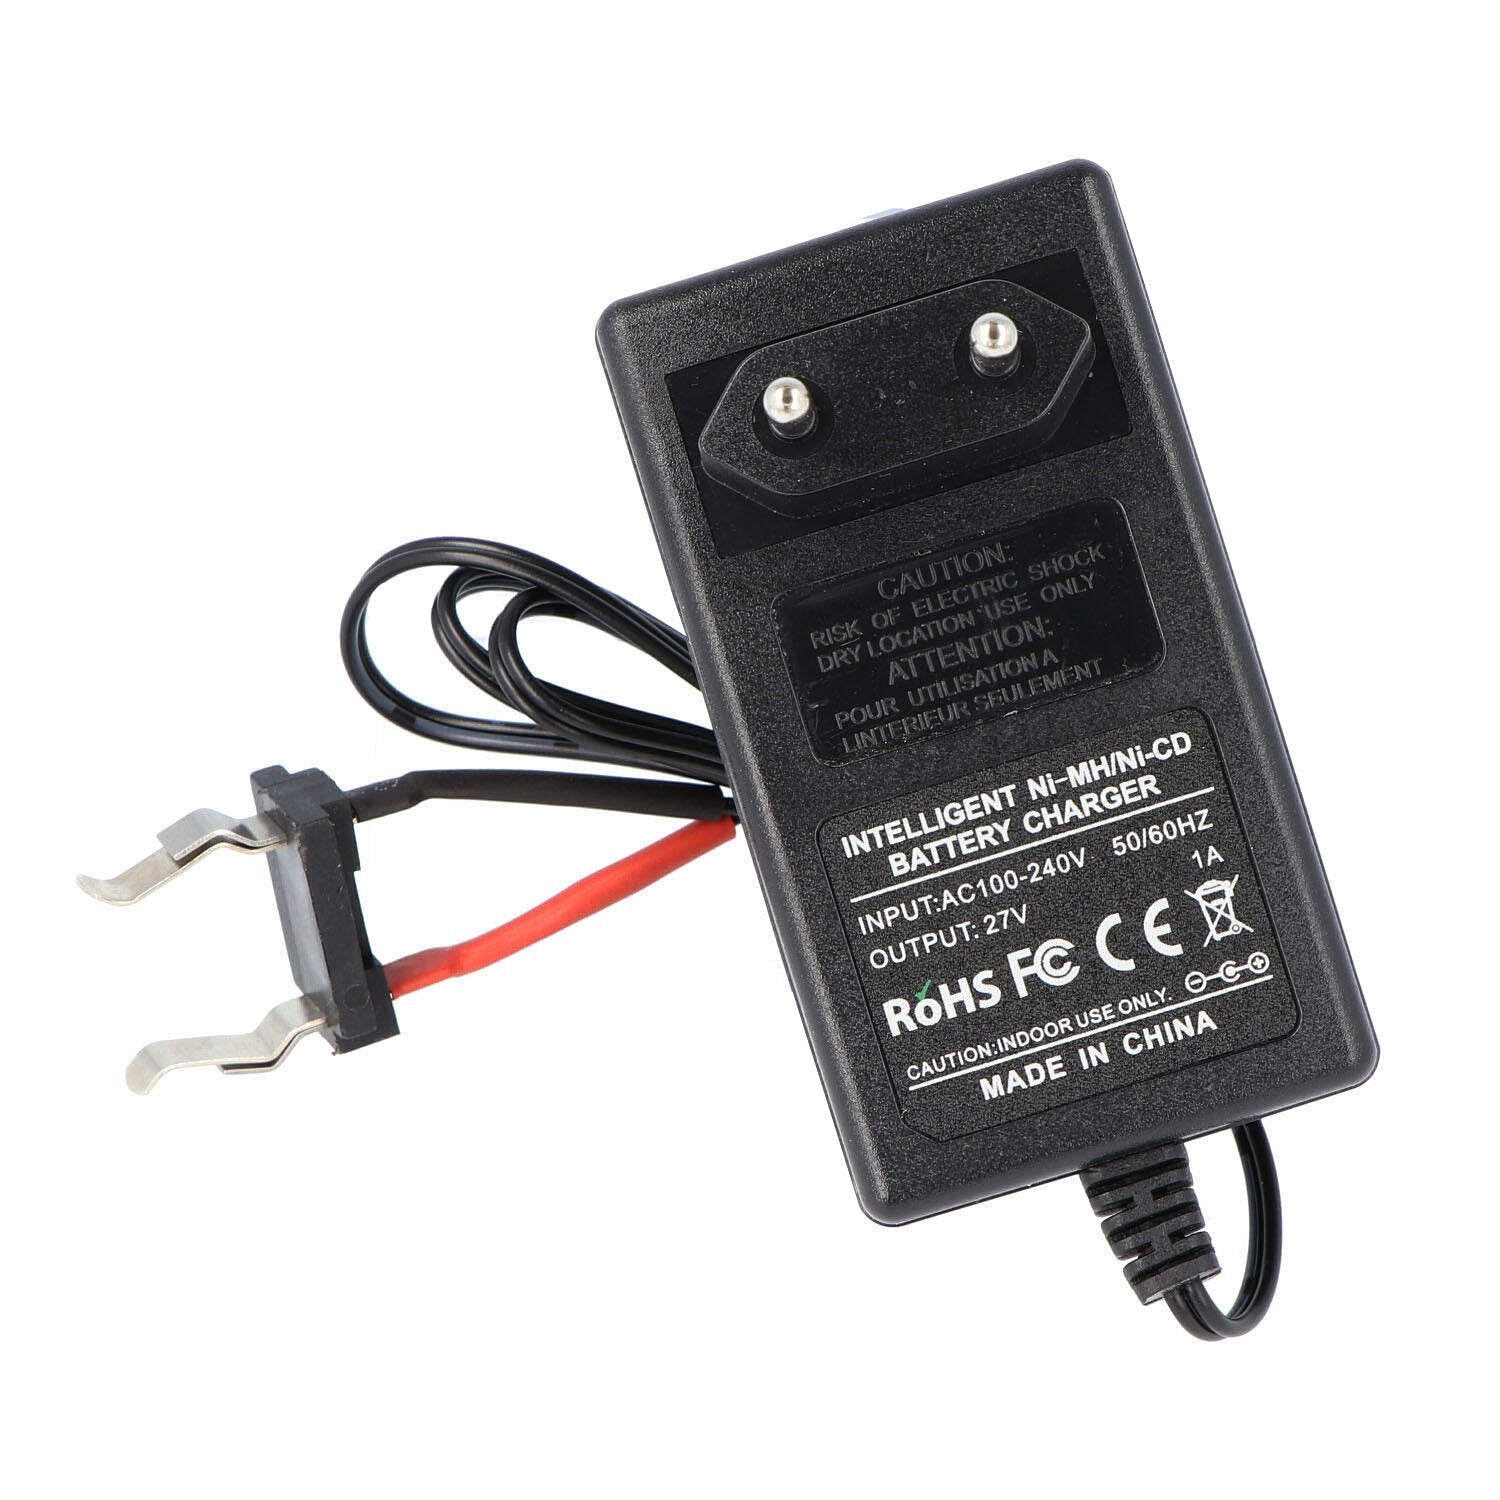 Quick charger suitable for the Bosch GBM 12VE, GSB, GSR 12VE, 2607335014, 2607335180, 2607335010, 26